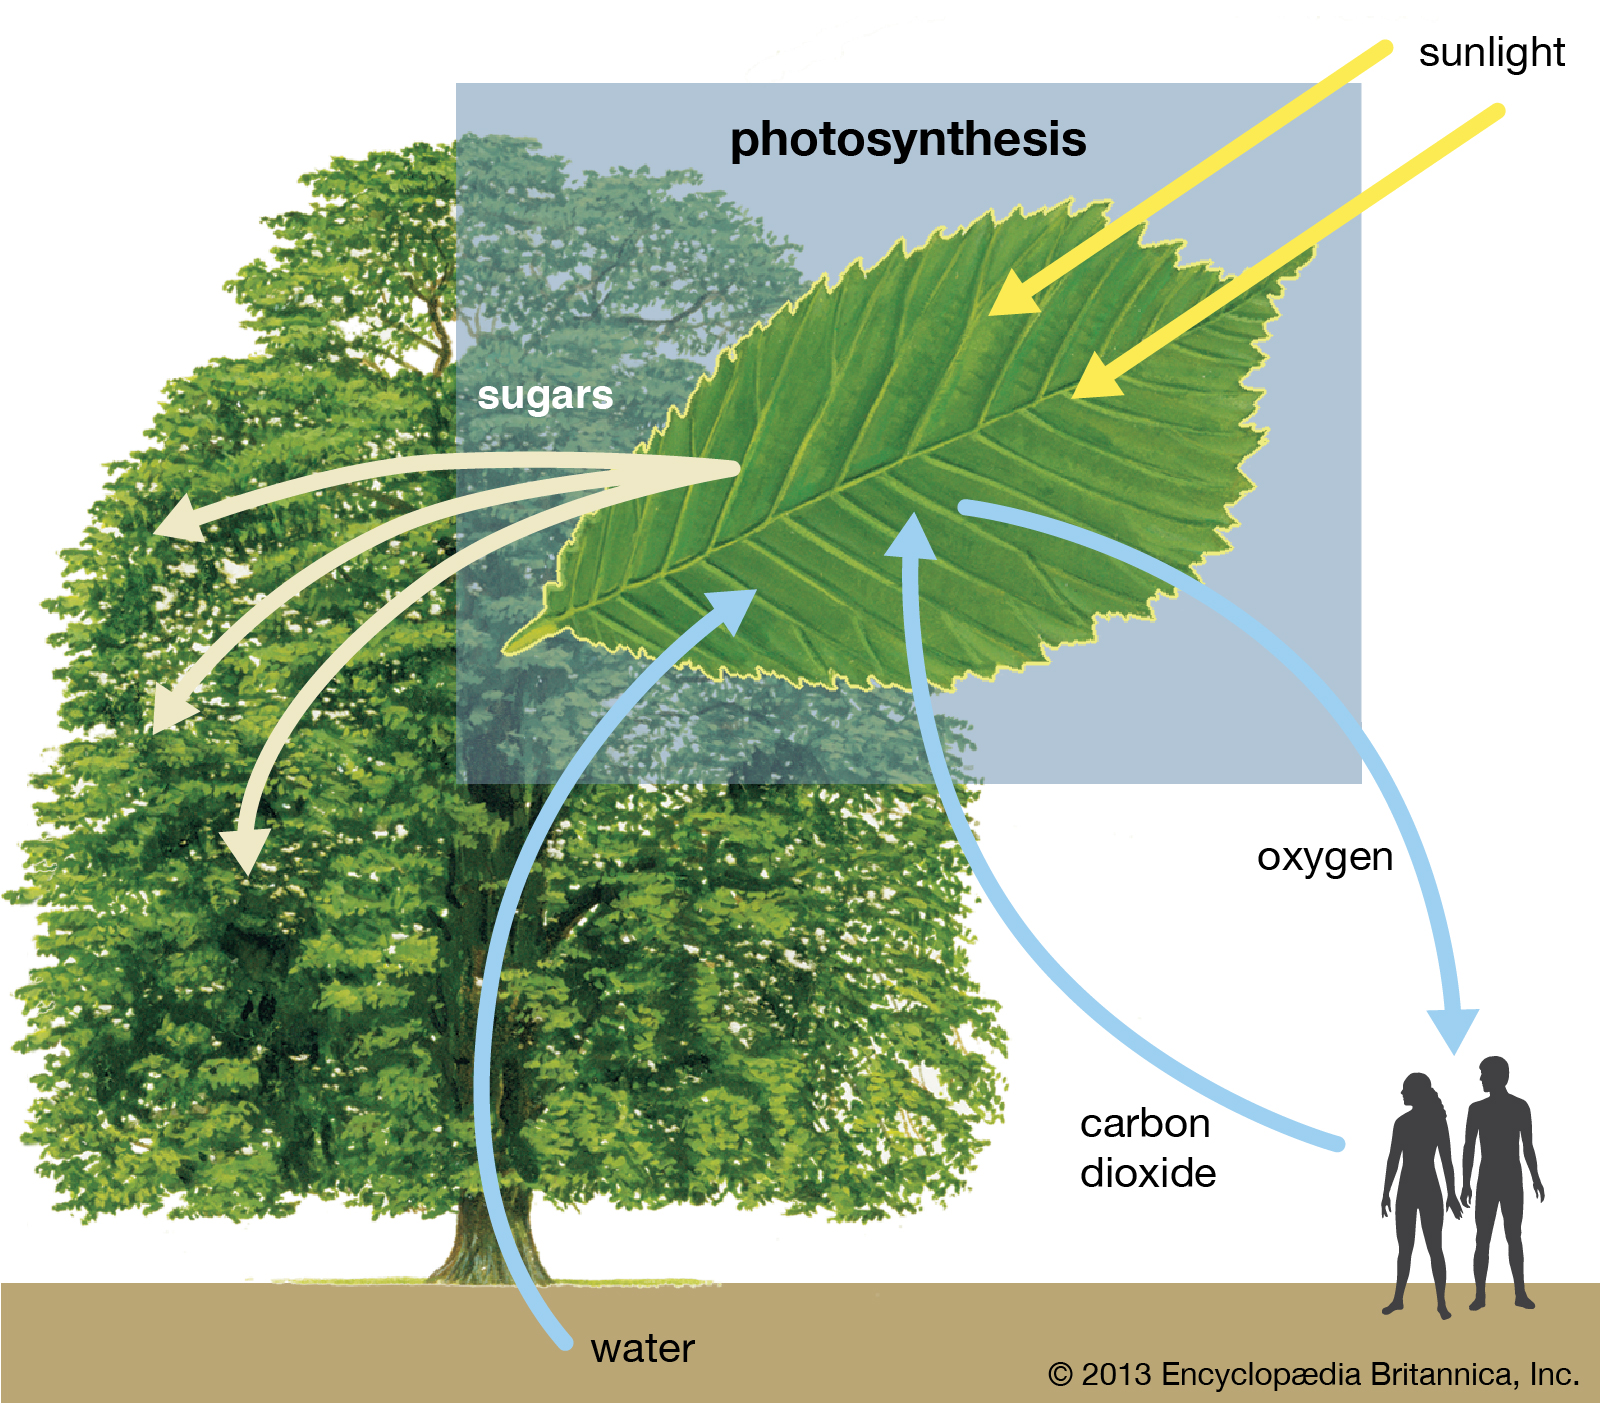 A Photosynthesis-absorbing  Chemical Compound Found in Plants